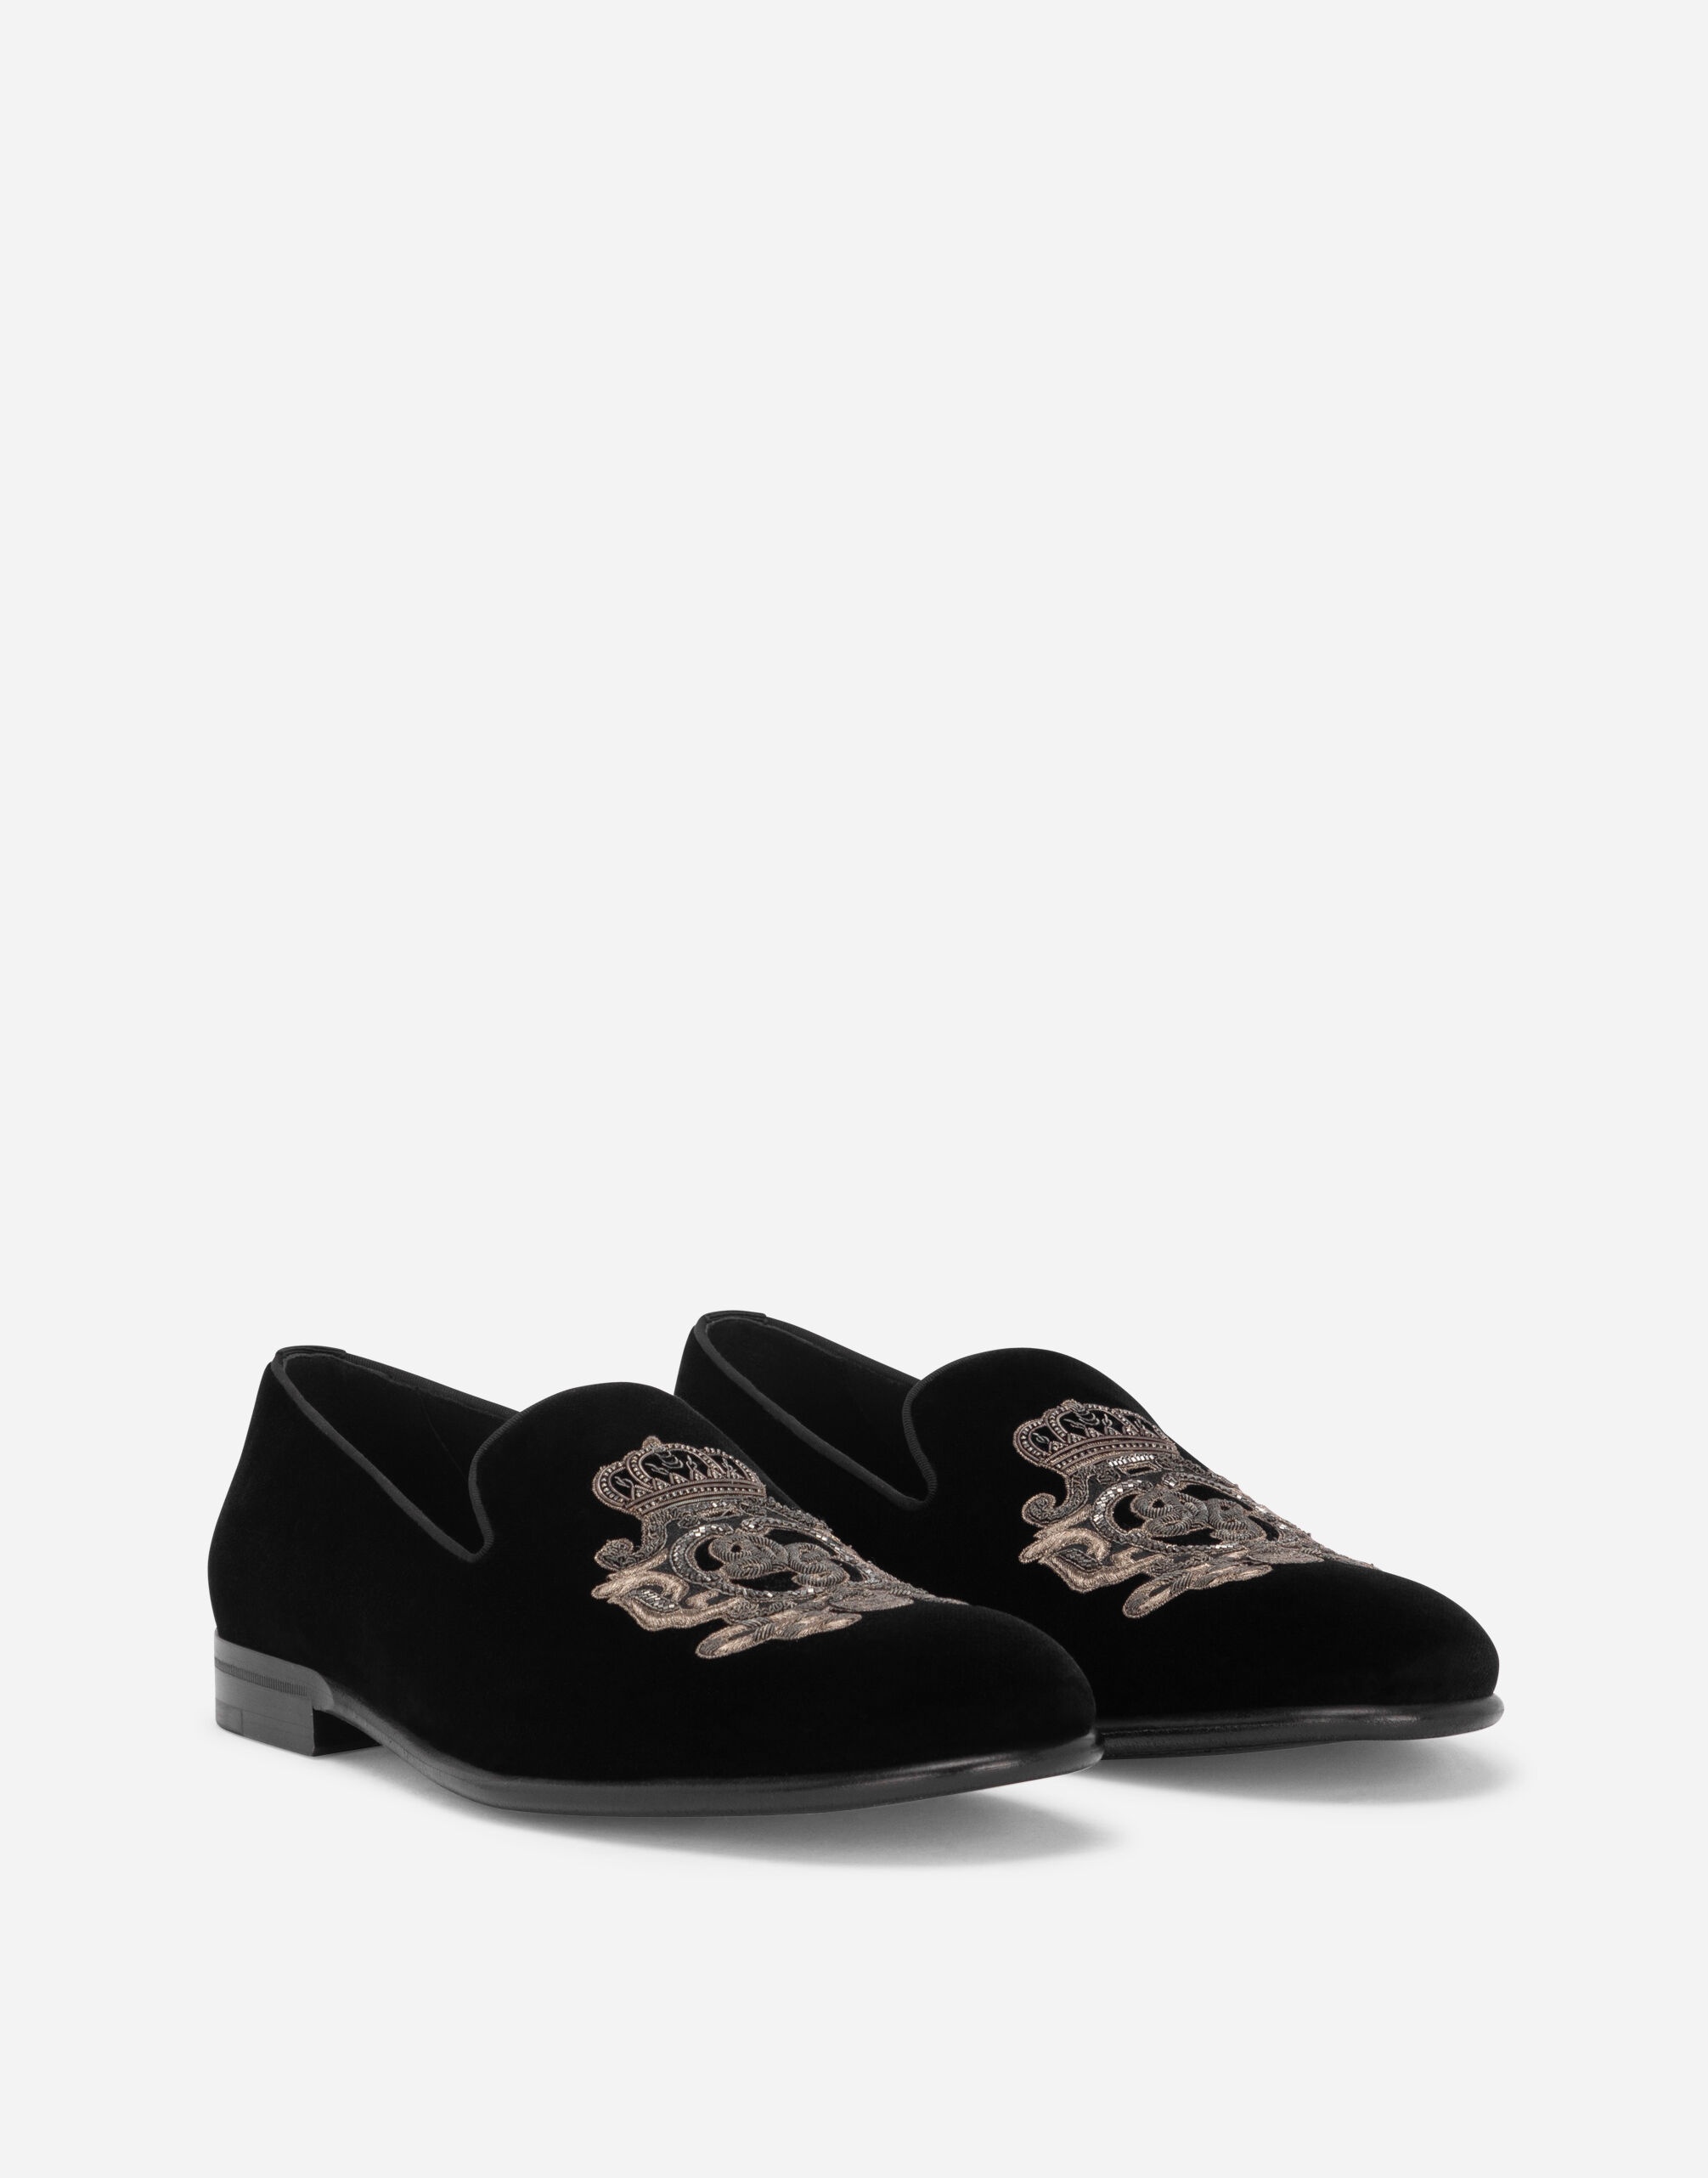 Velvet slippers with coat of arms embroidery - 2